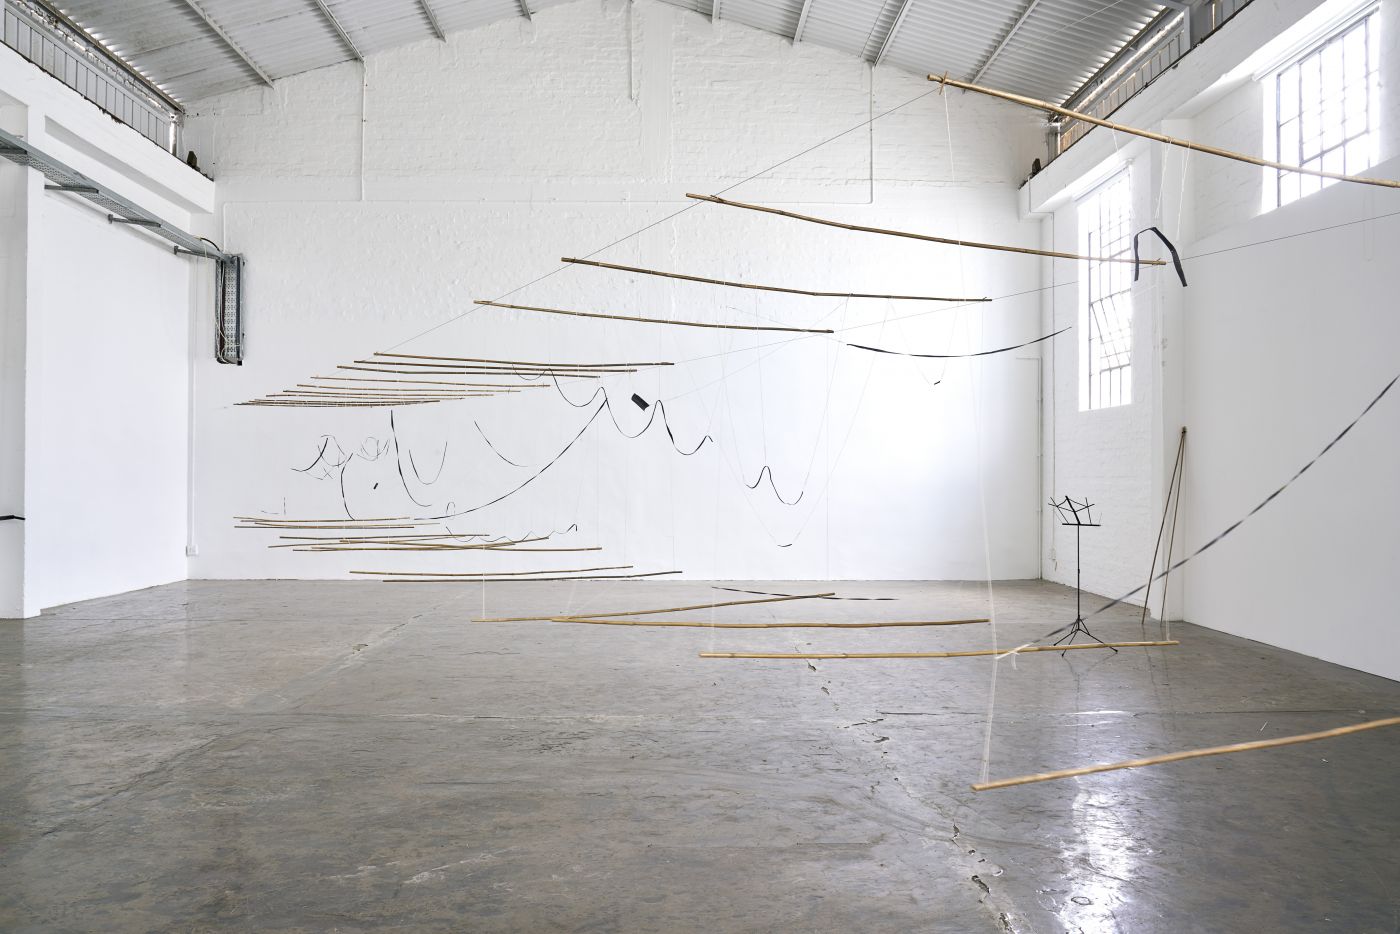 Hanging Drawings 2020 Installation view at Maitland Institute Cape Town 9